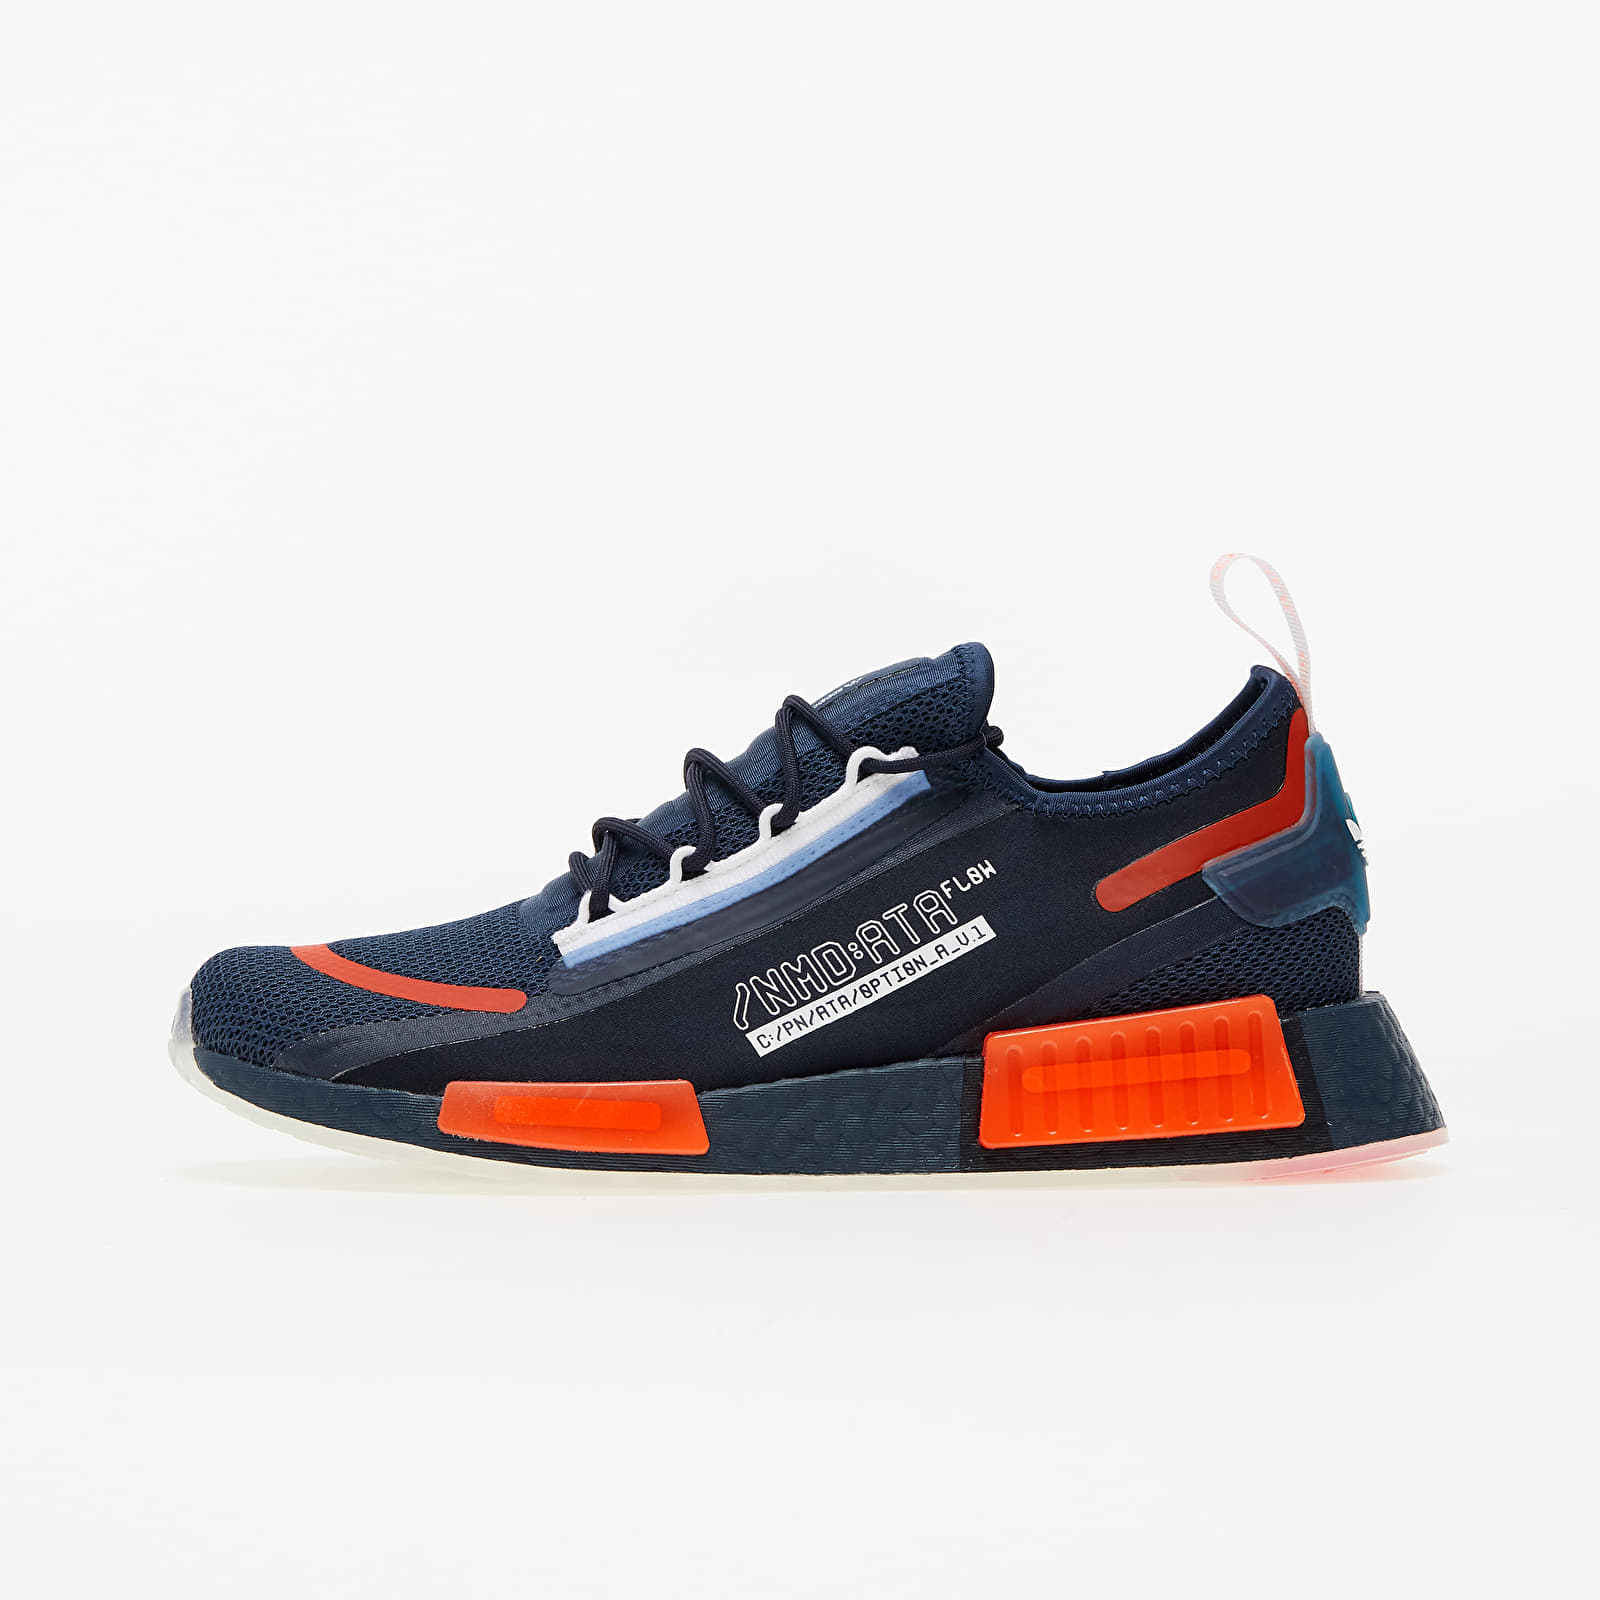 Men's shoes adidas NMD_R1 Spectoo Crew Navy/ Legend Ink/ Solar Red